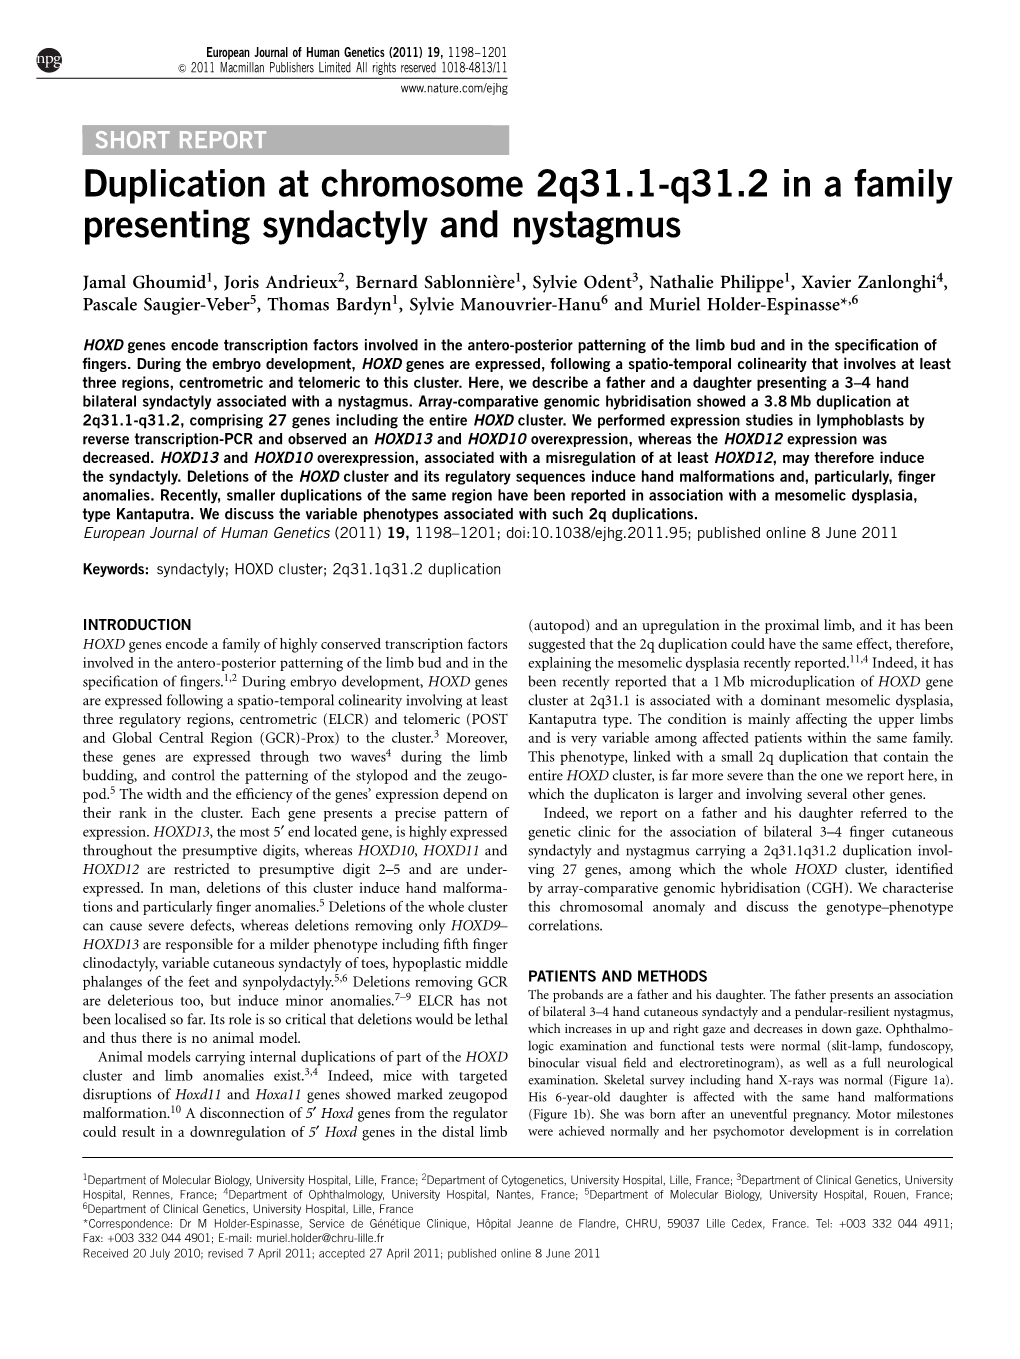 Duplication at Chromosome 2Q31.1-Q31.2 in a Family Presenting Syndactyly and Nystagmus